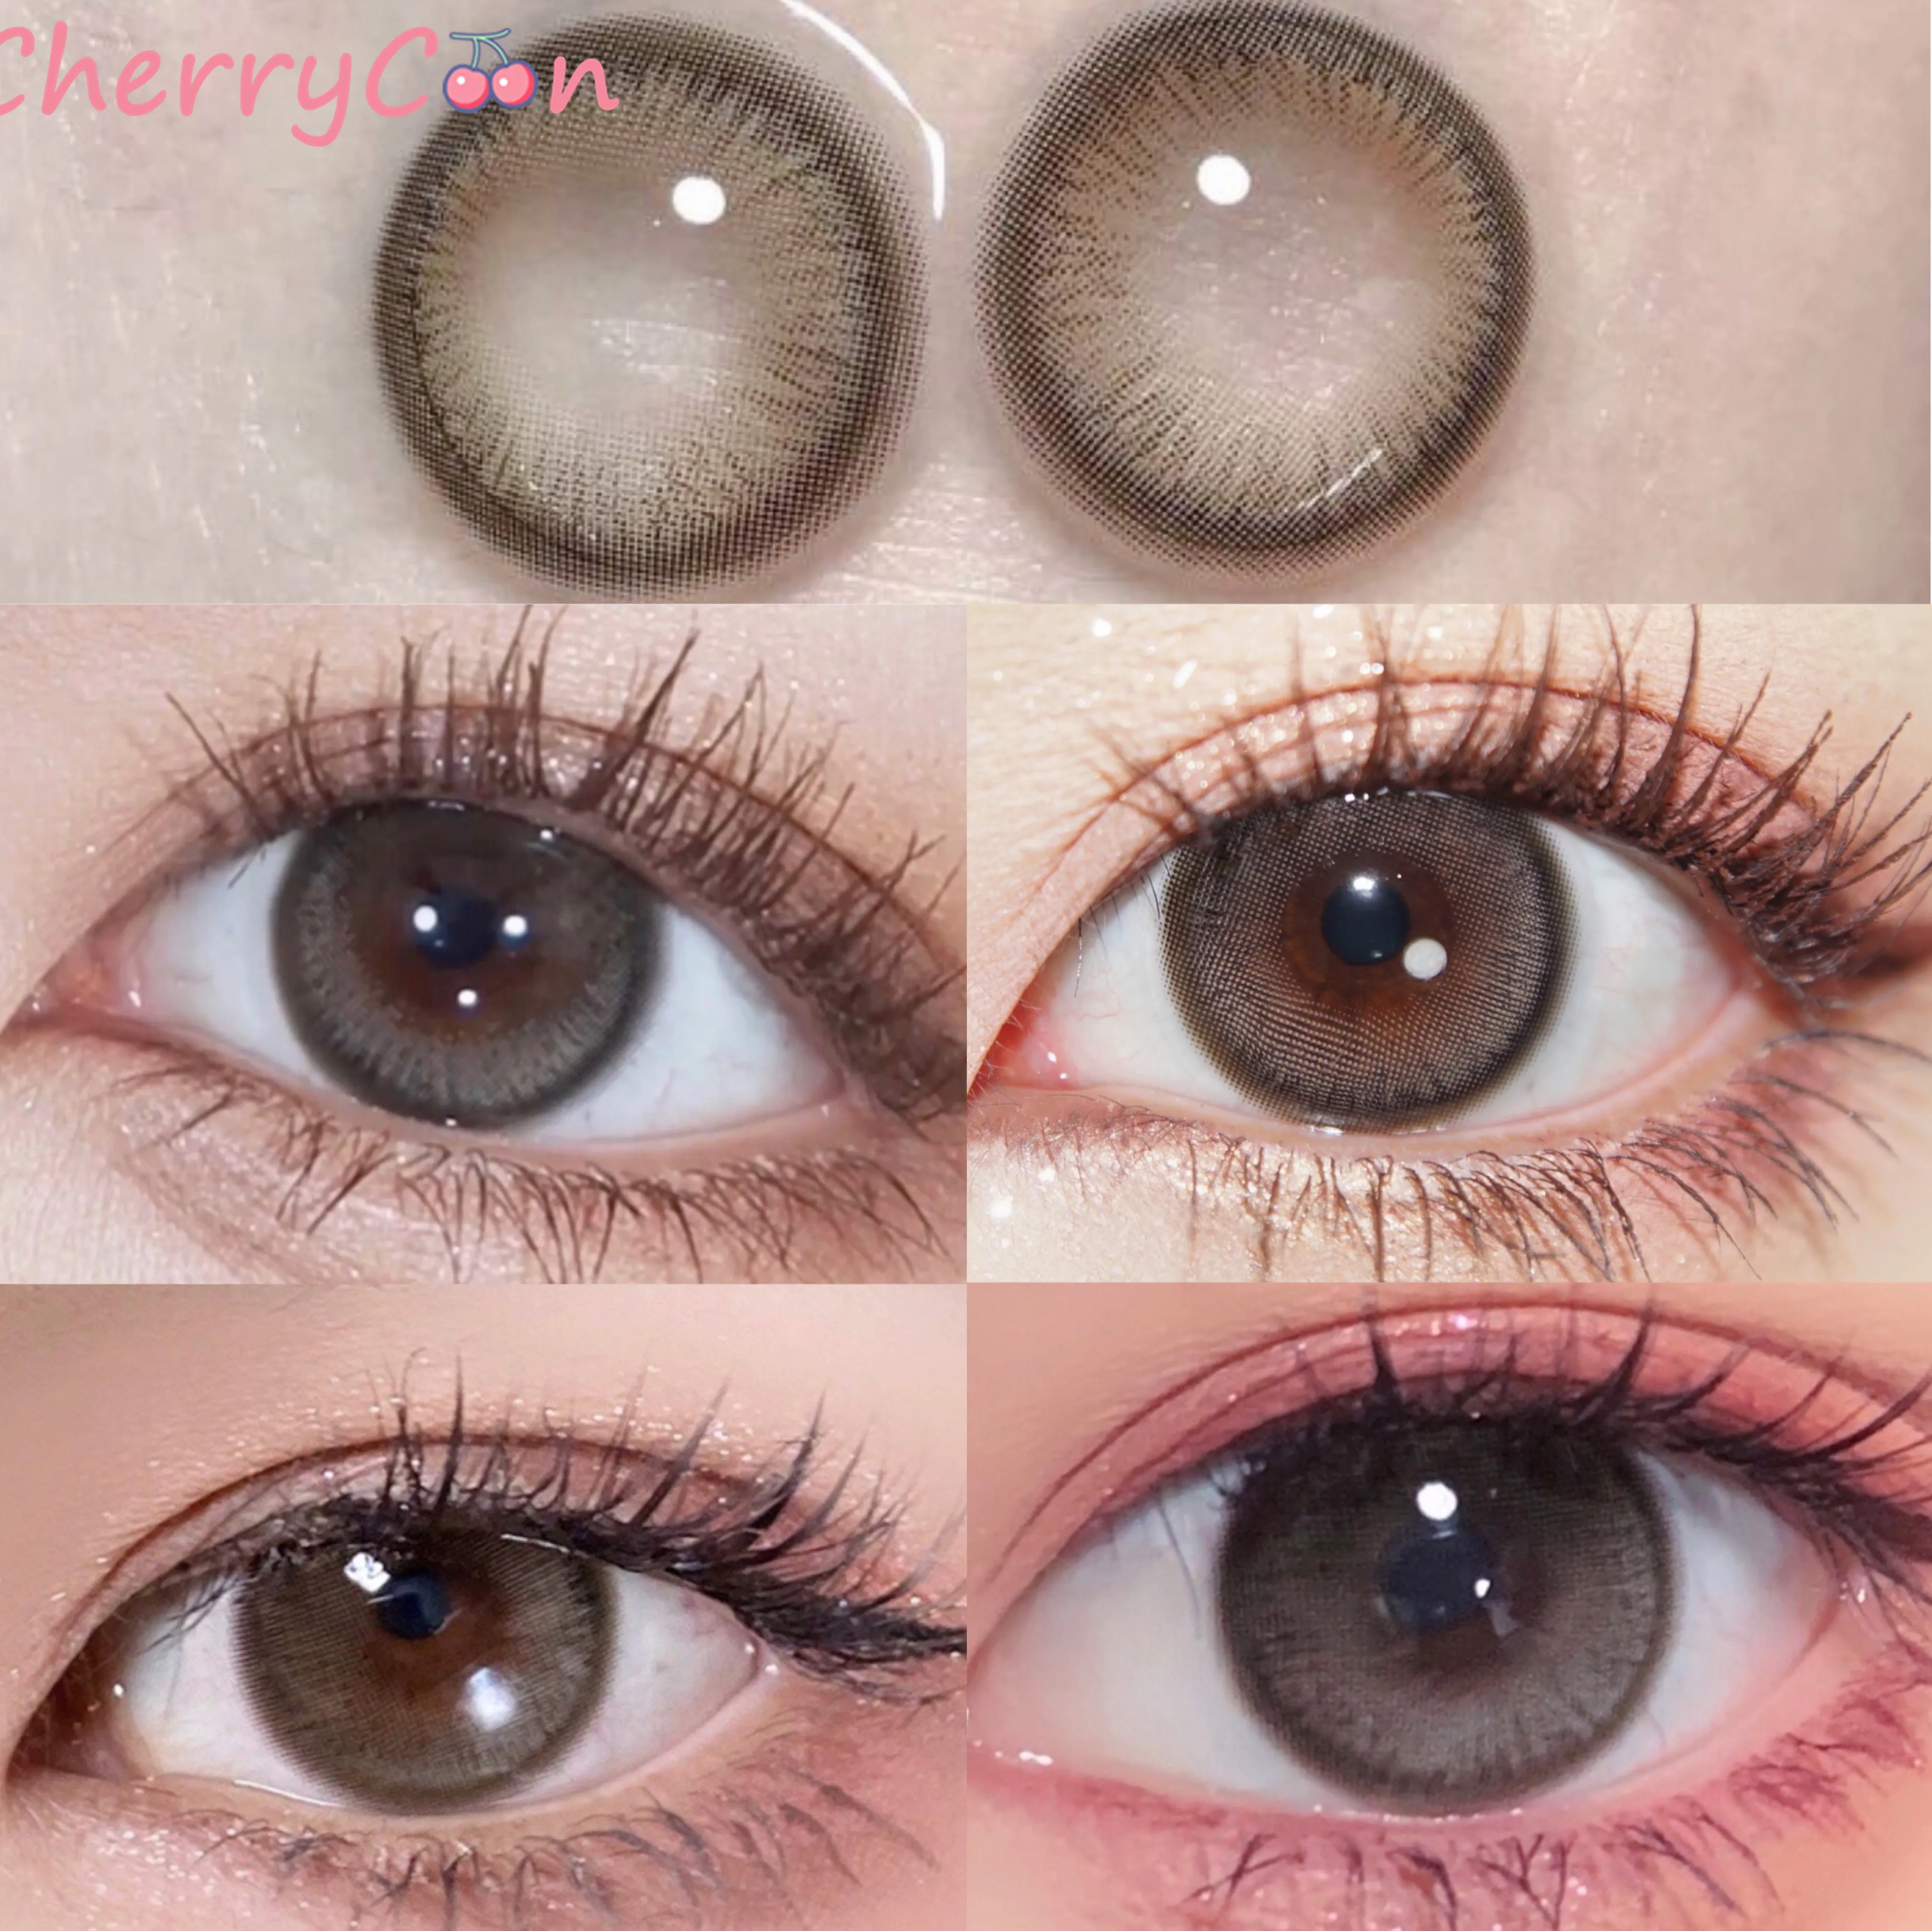 

Cherrycon Sesame Gray Colored Contact Lenses for eyes Makeup yearly contact lens cosplay 2pcs/pair Myopia prescription degrees